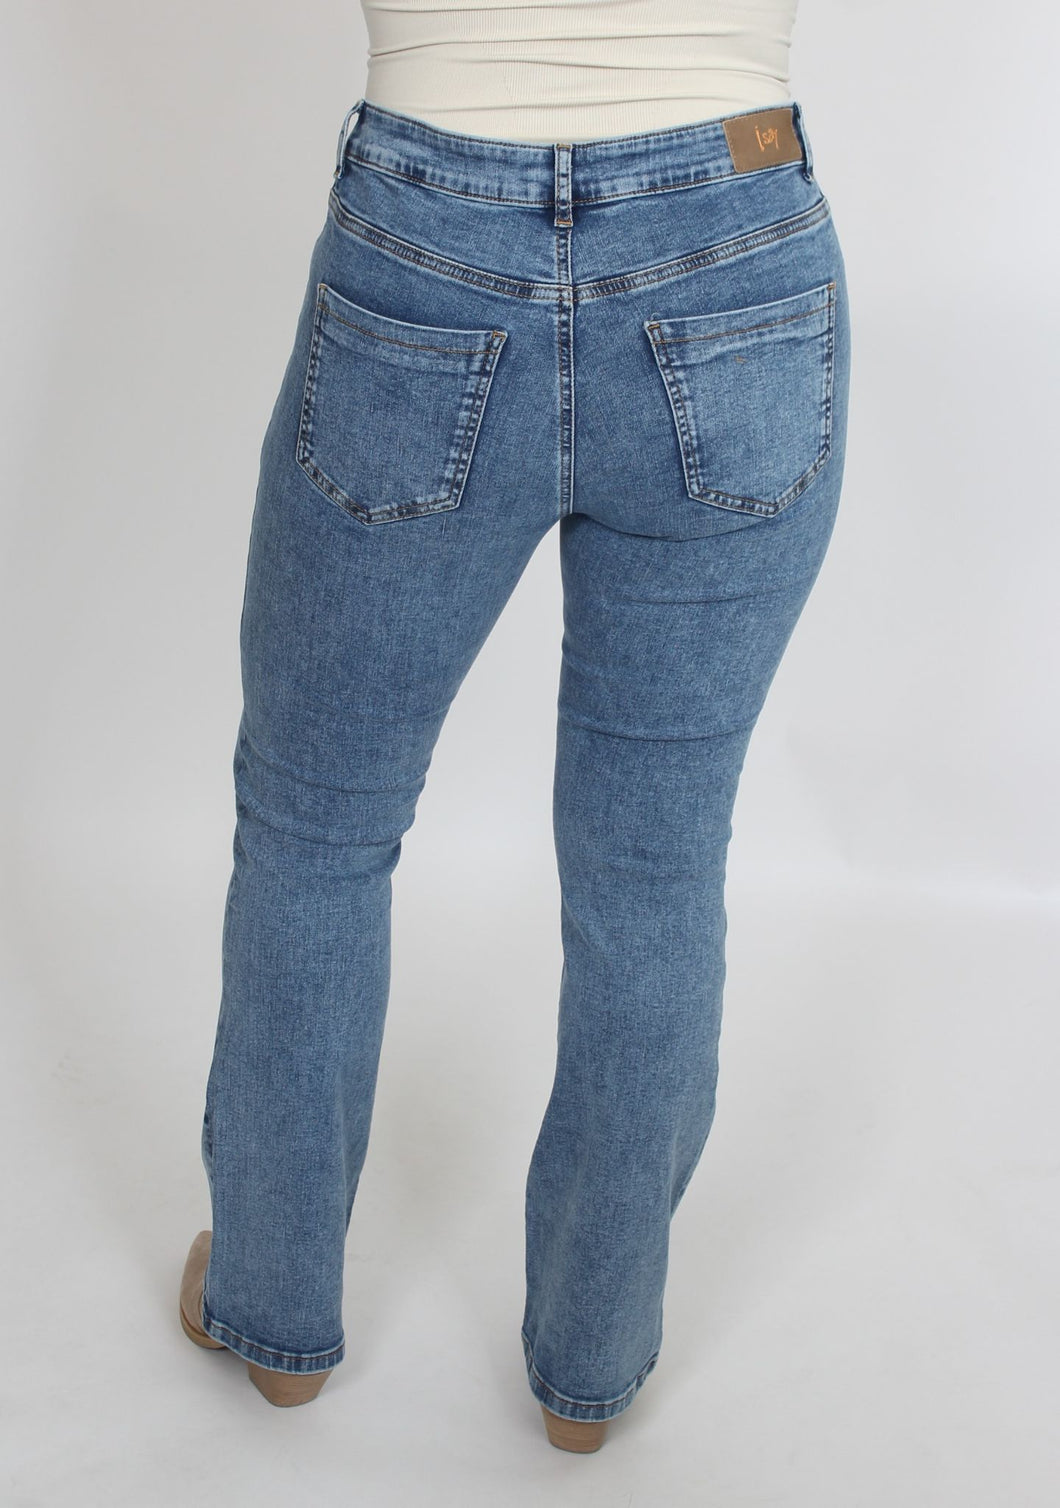 Isay Parma Basic Jeans